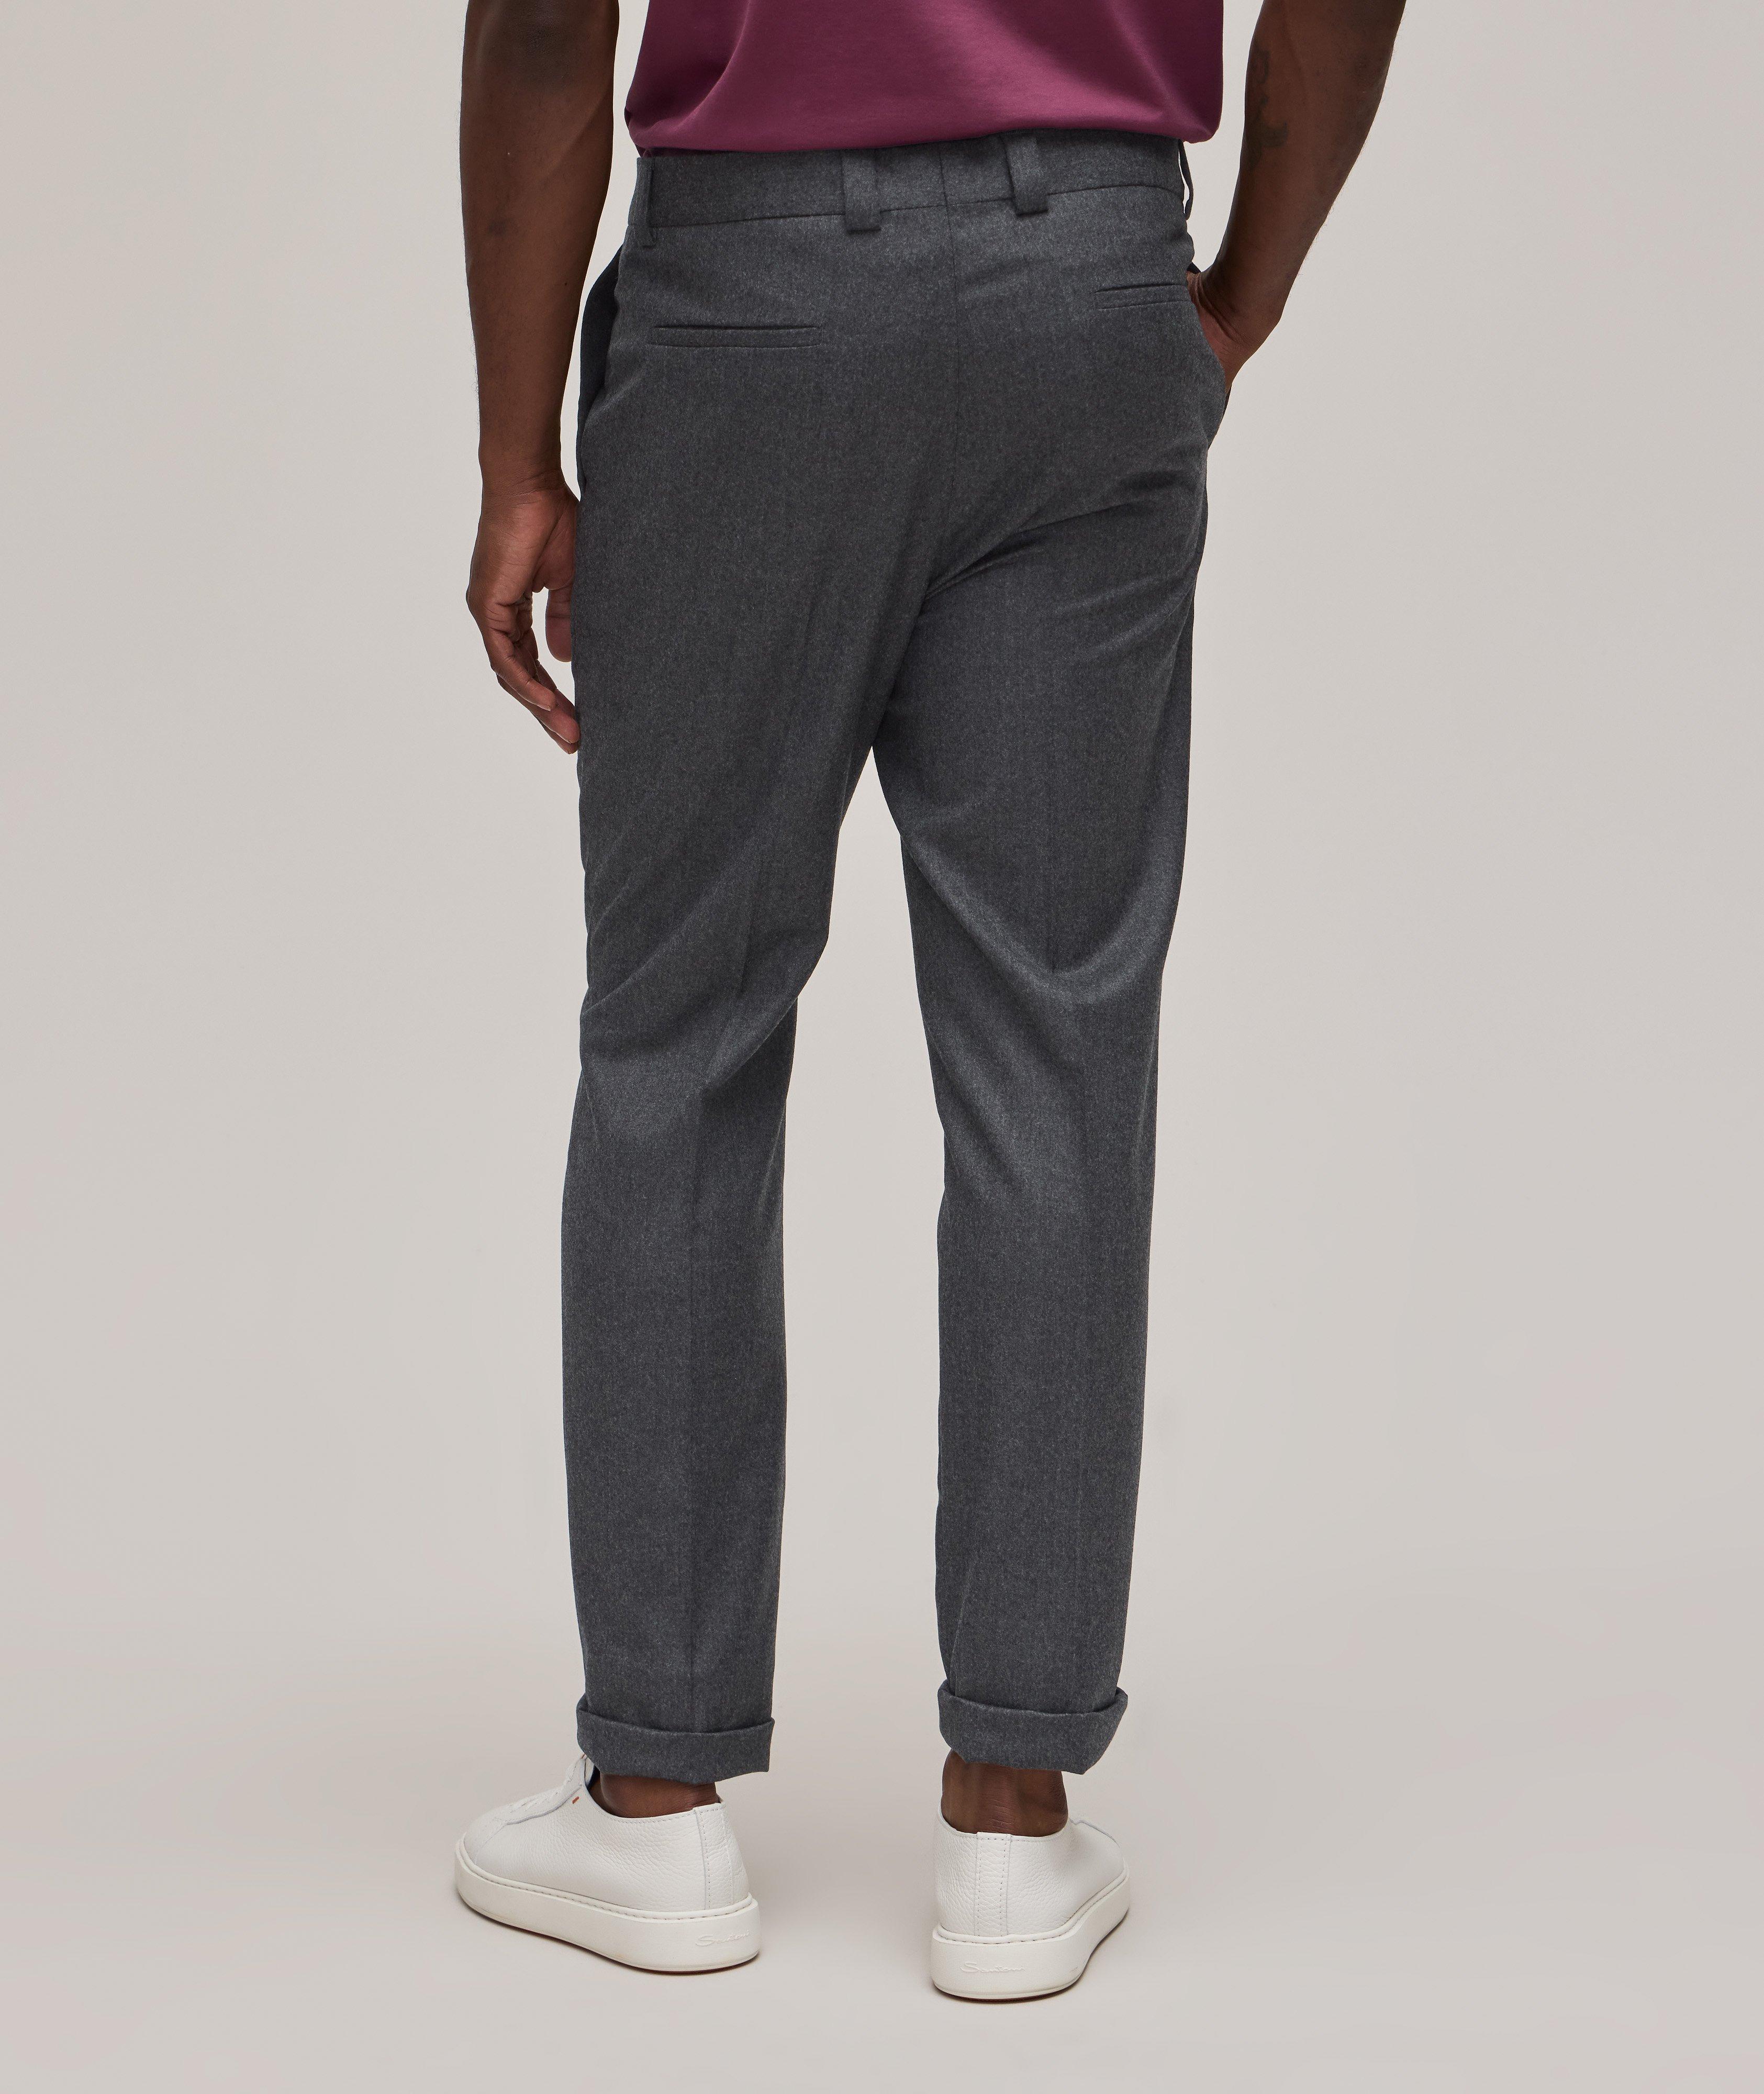 Flannel Wool Leisure Fit Trousers image 2